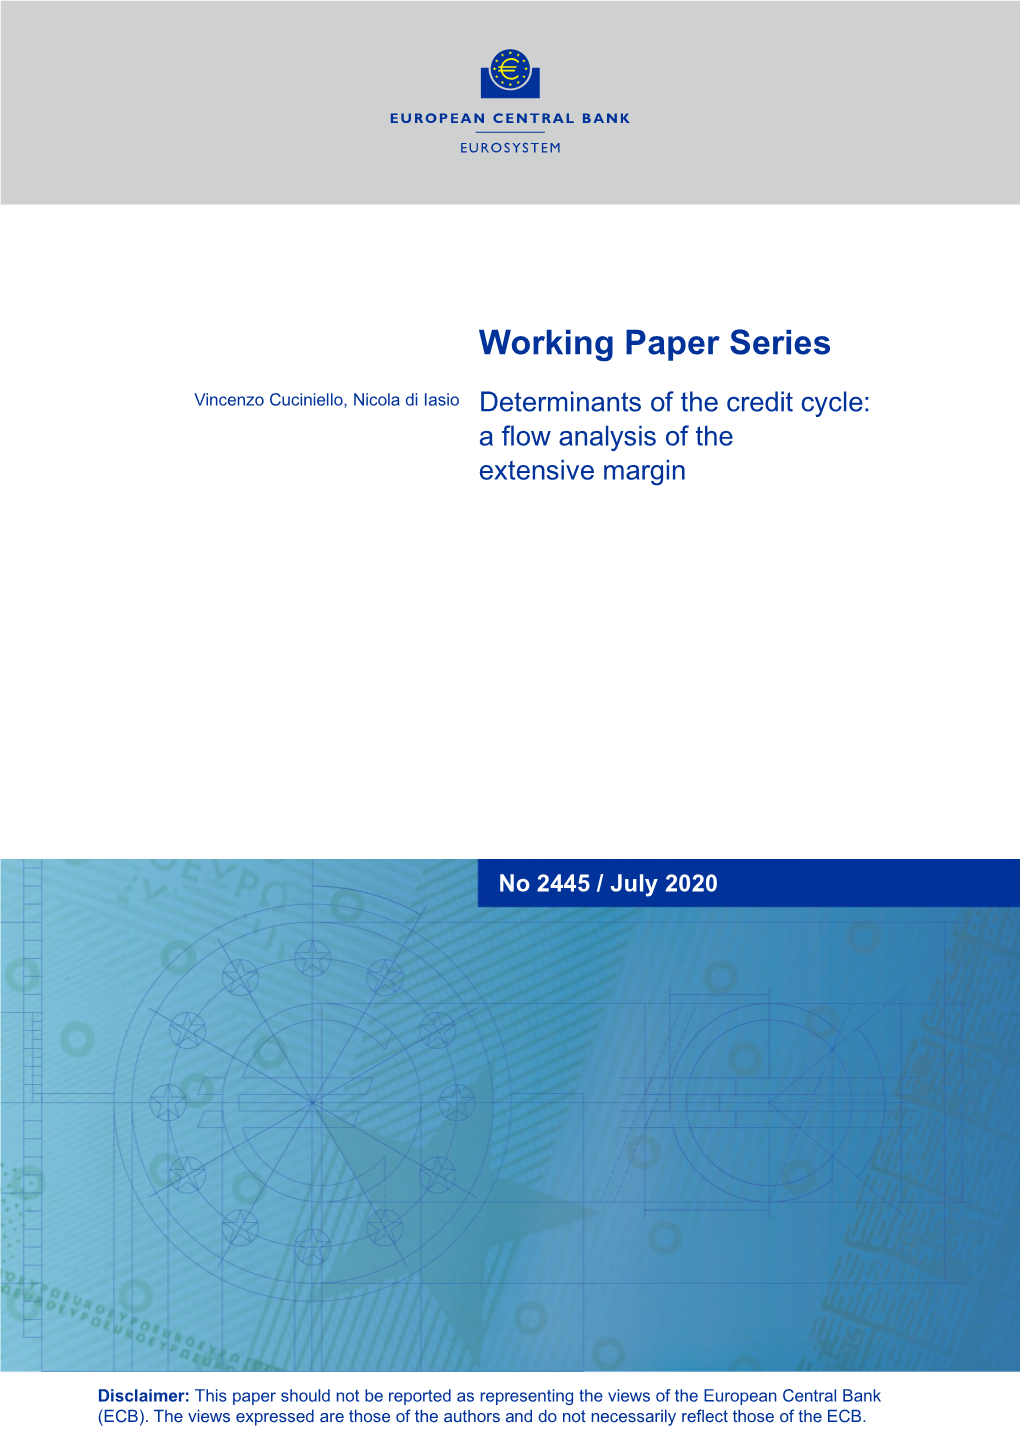 Determinants of the Credit Cycle: a Flow Analysis of the Extensive Margin